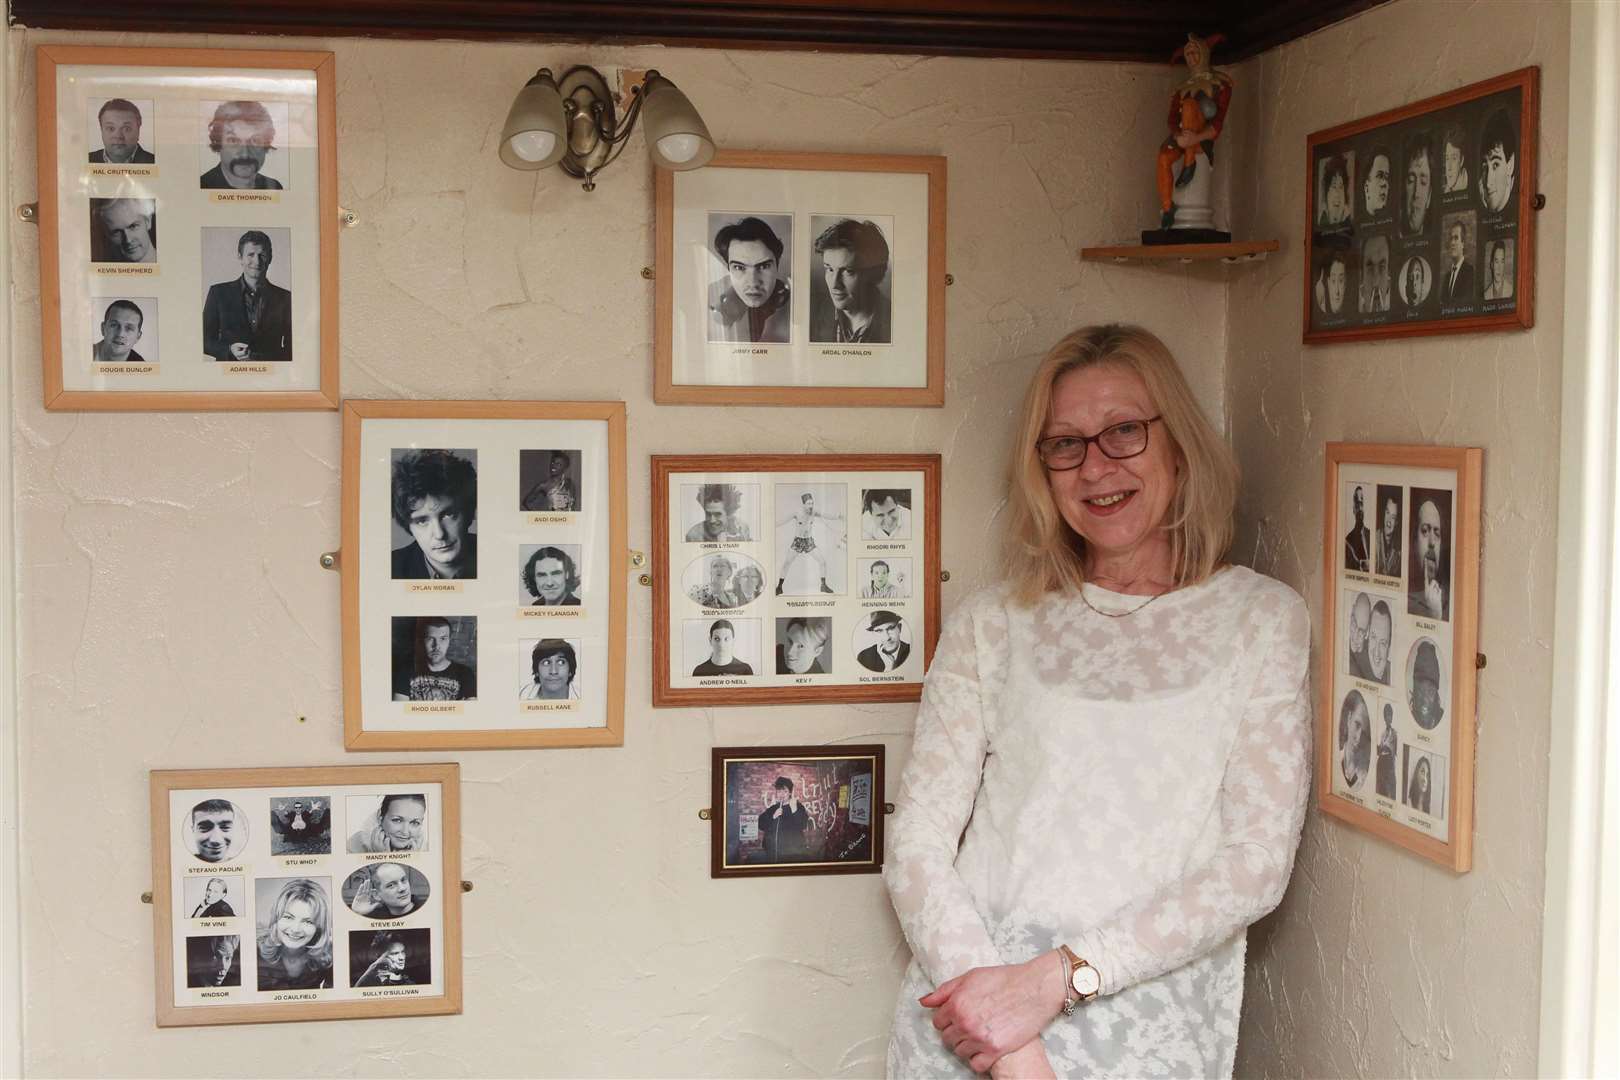 Rosaline Janko, who has been landlady of The Walnut Tree in Maidstone for the past seven years, stands by pictures of the famous comedians who have performed at her pub